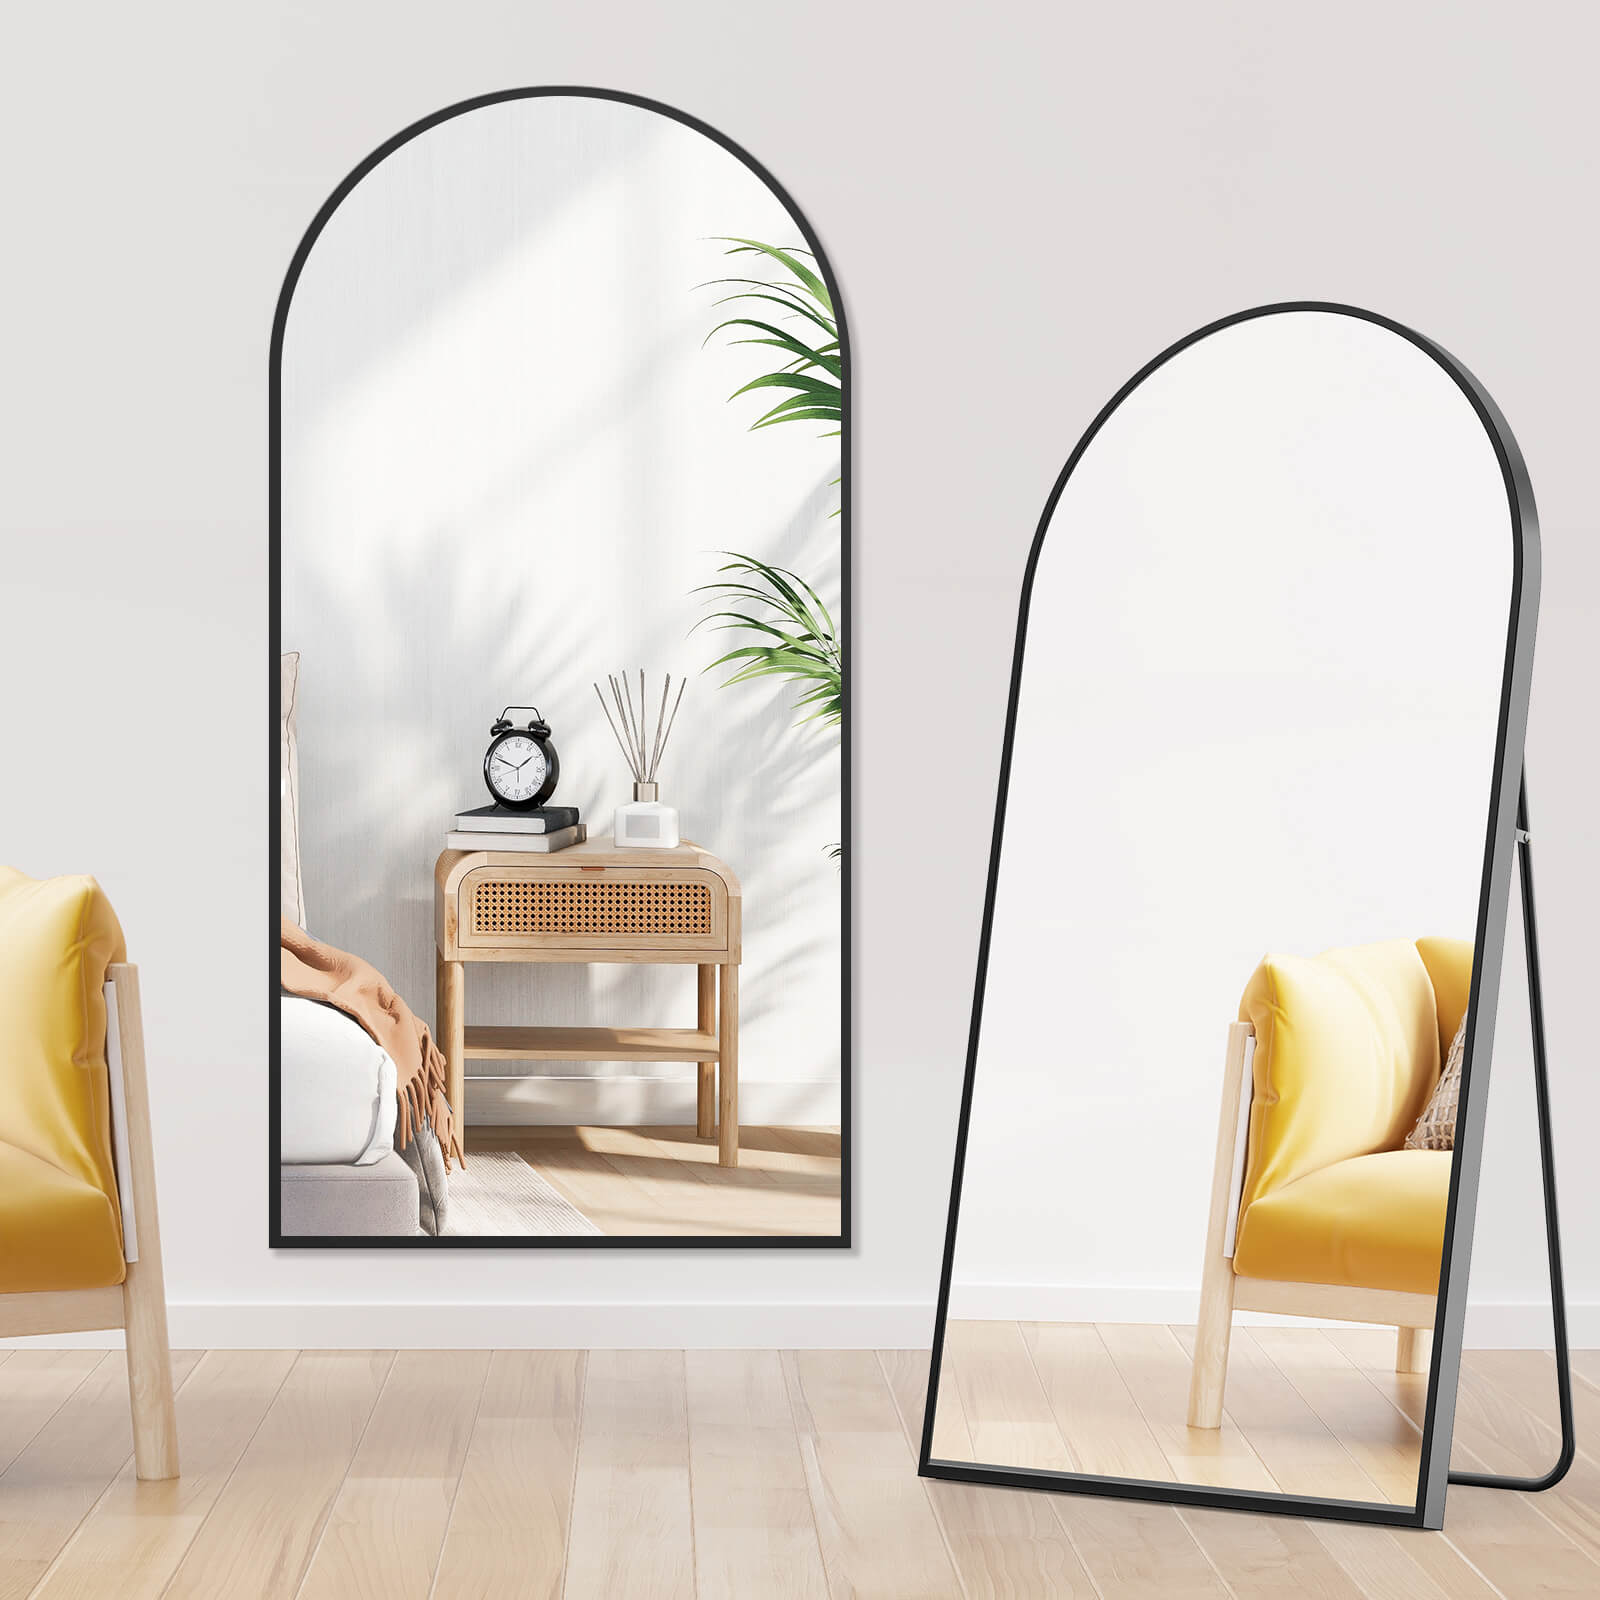 59"x16" Floor Standing Mirror, Wall Mirror with Stand Aluminum Alloy Thin Frame